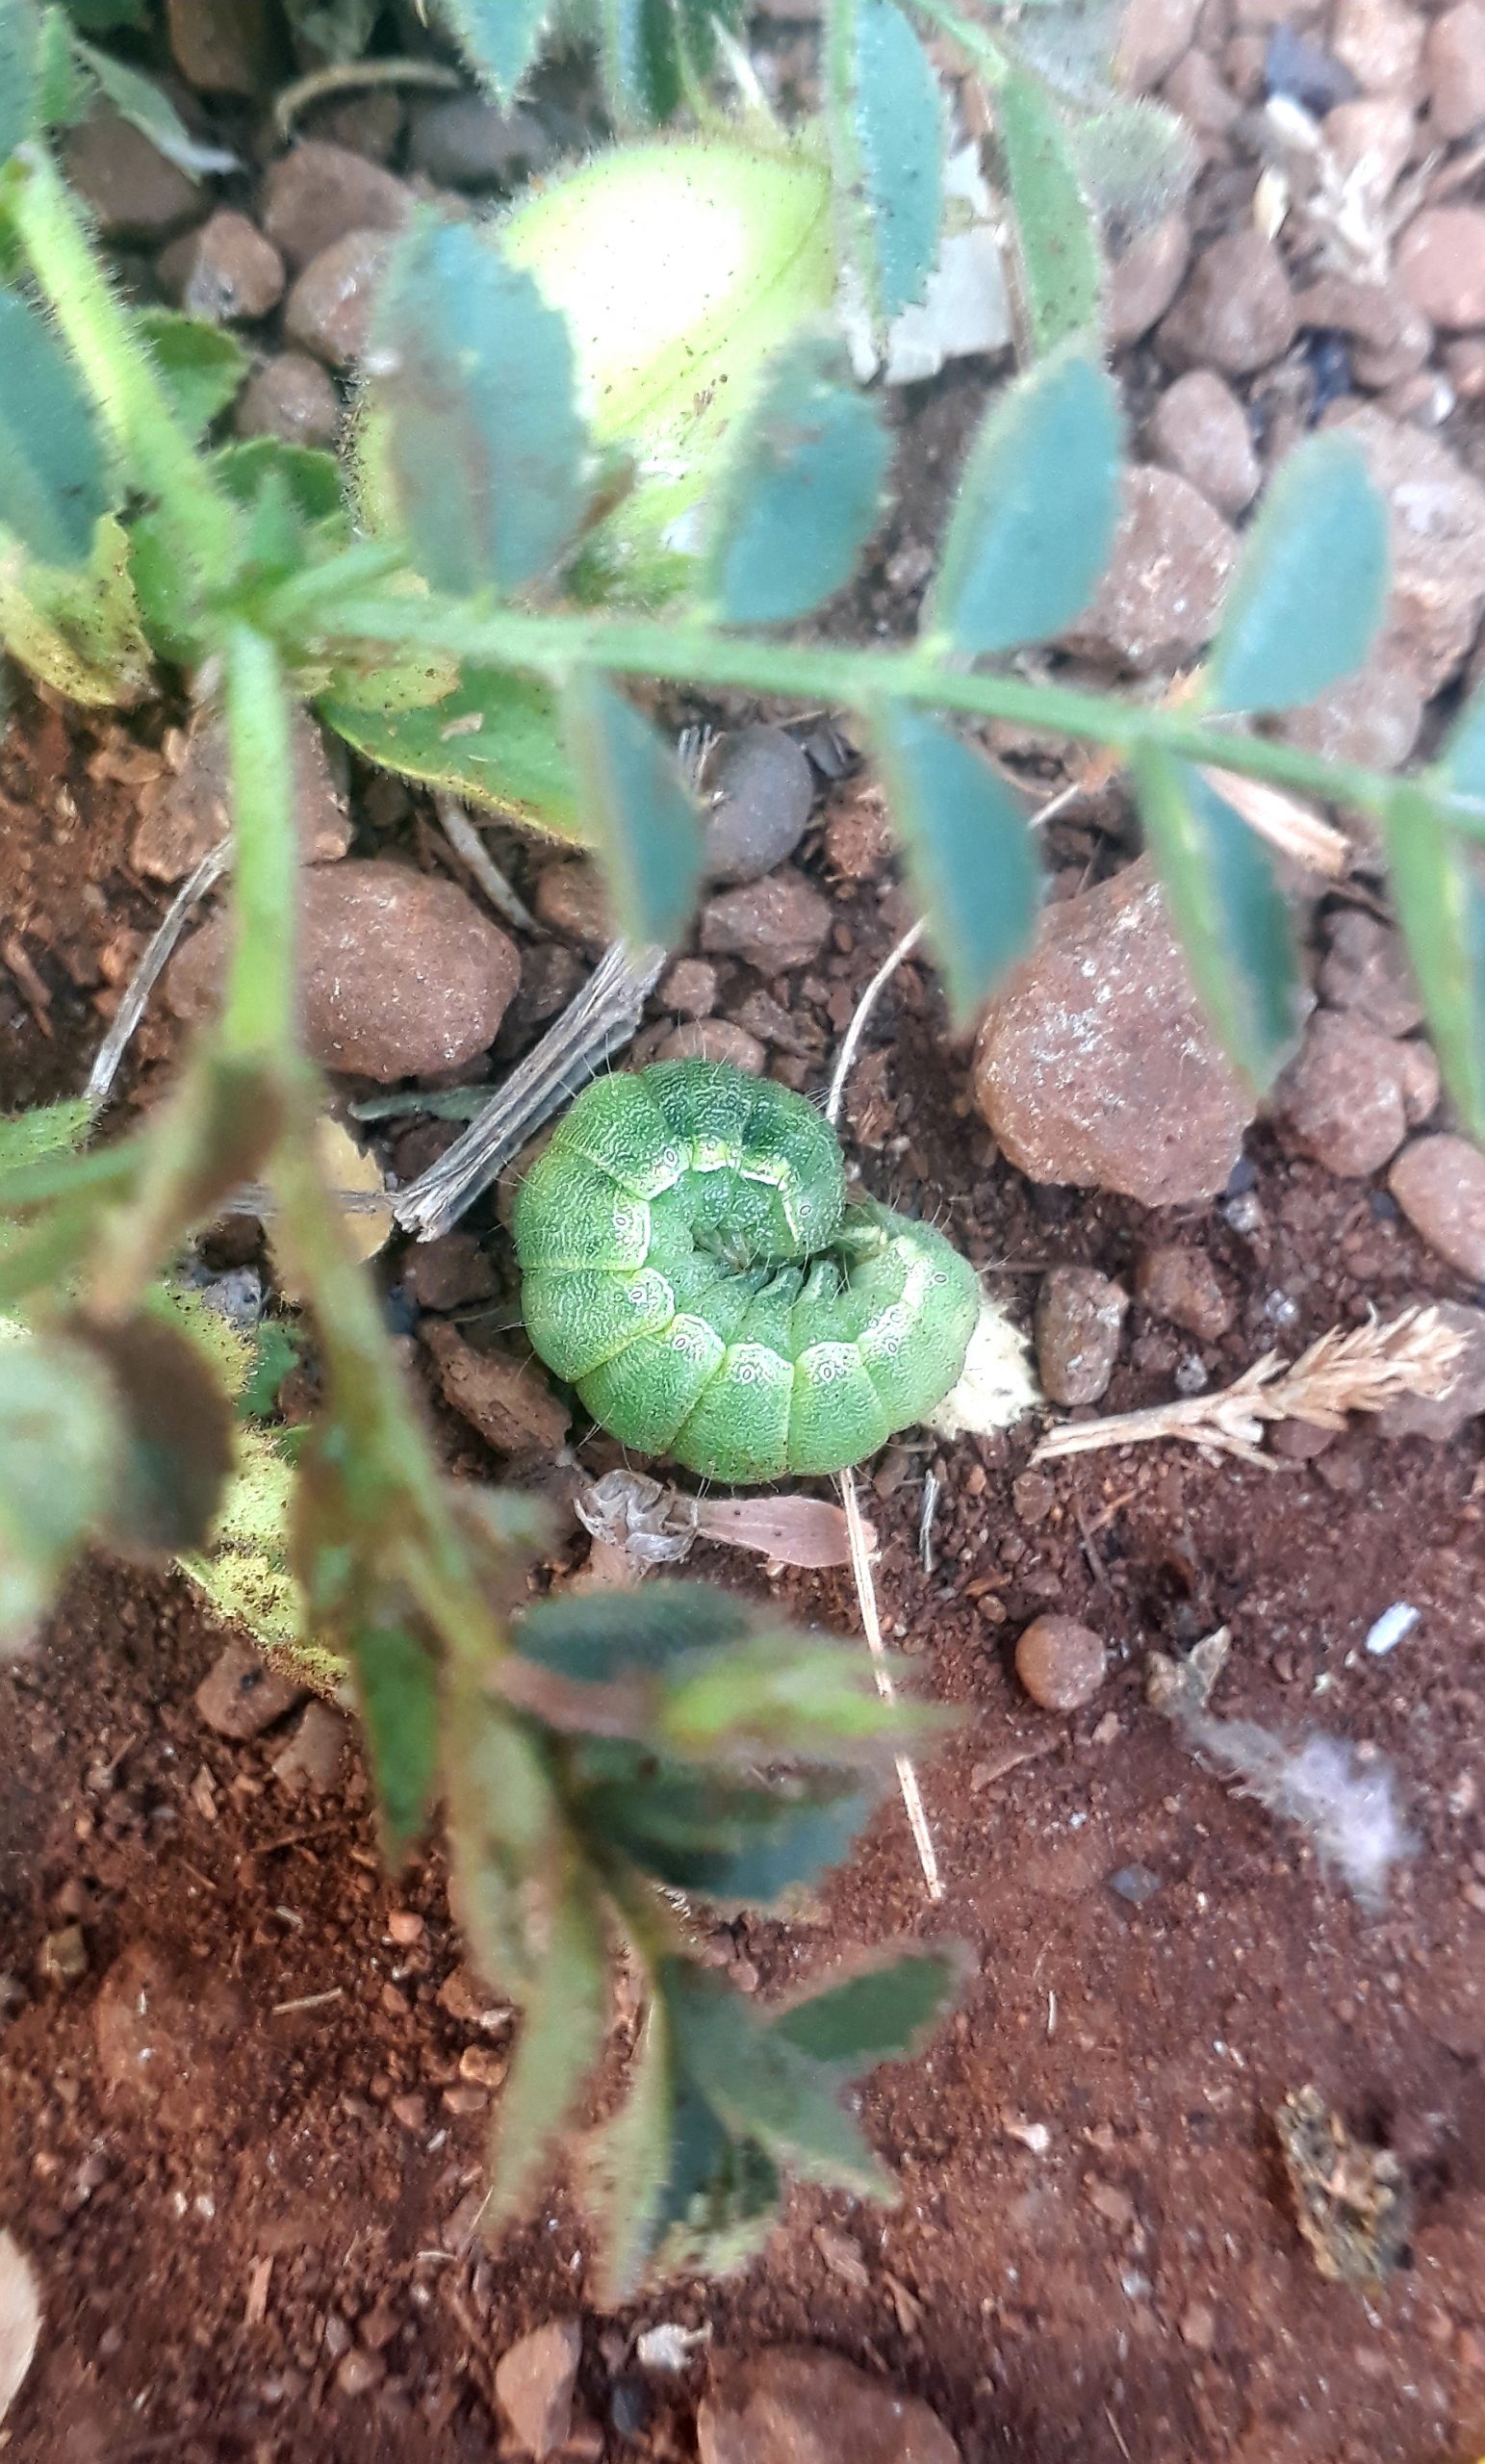 A worm and plant leaves